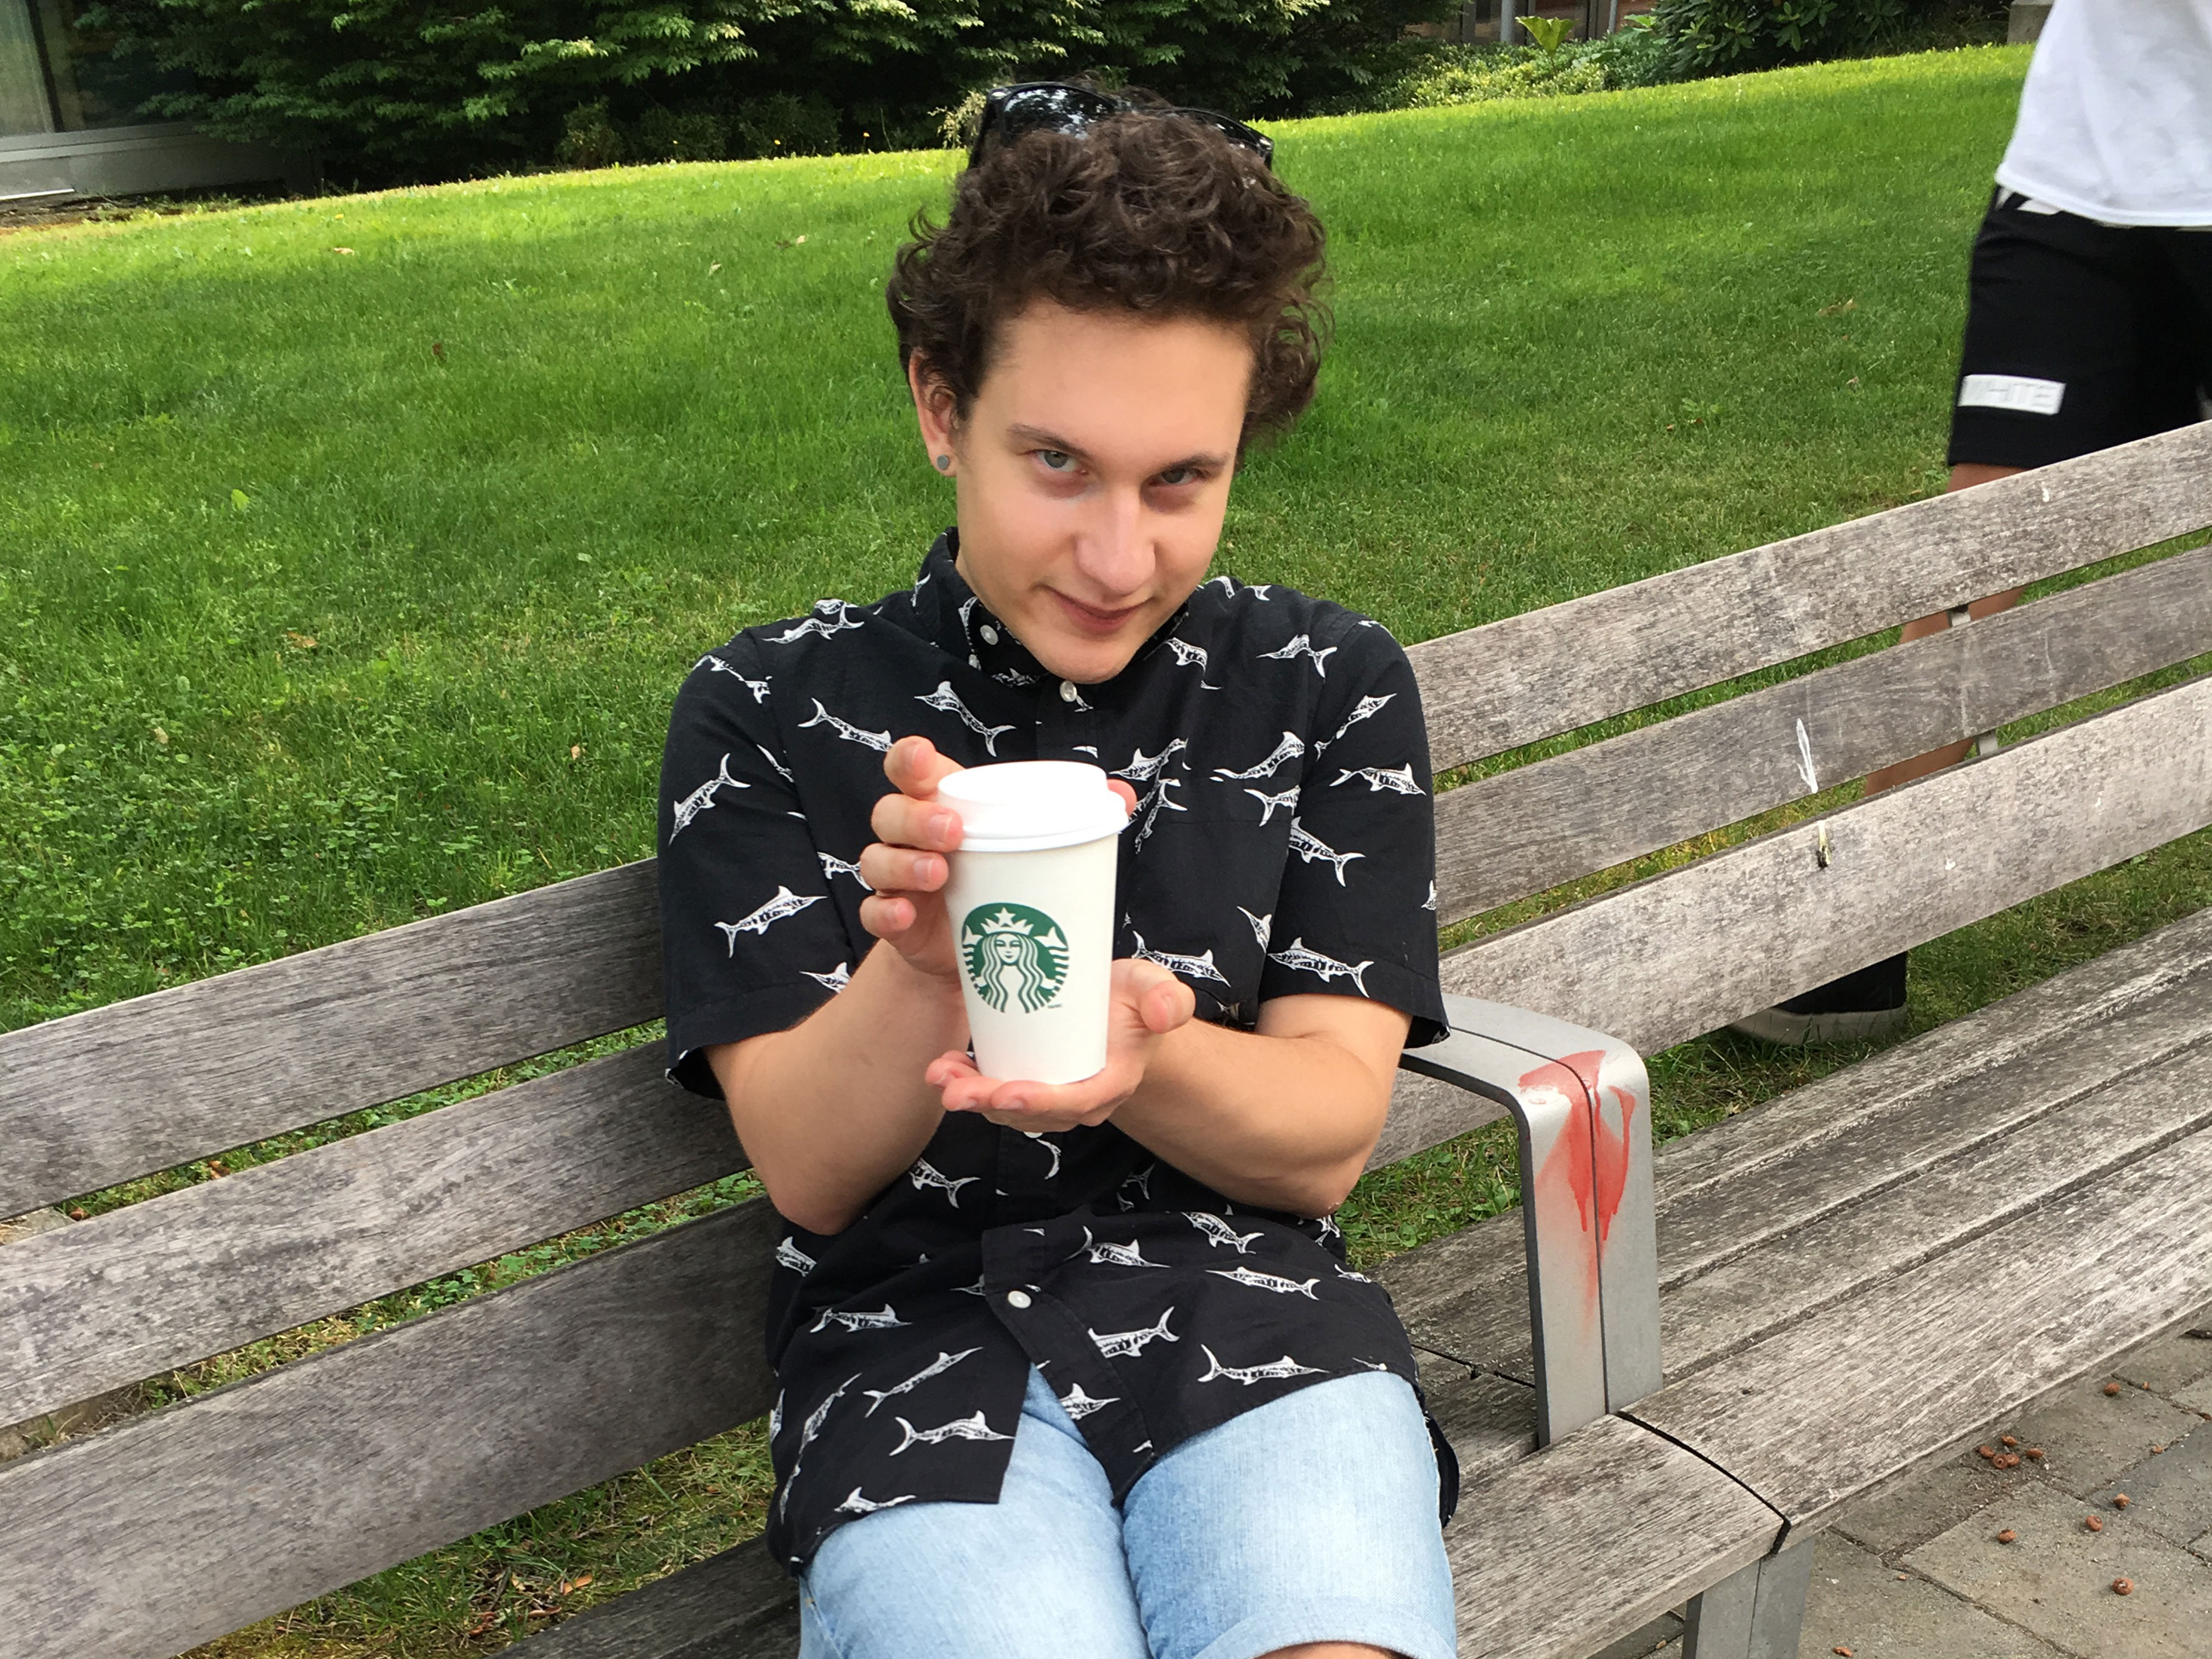 derrick holding a latte and sitting on a bench